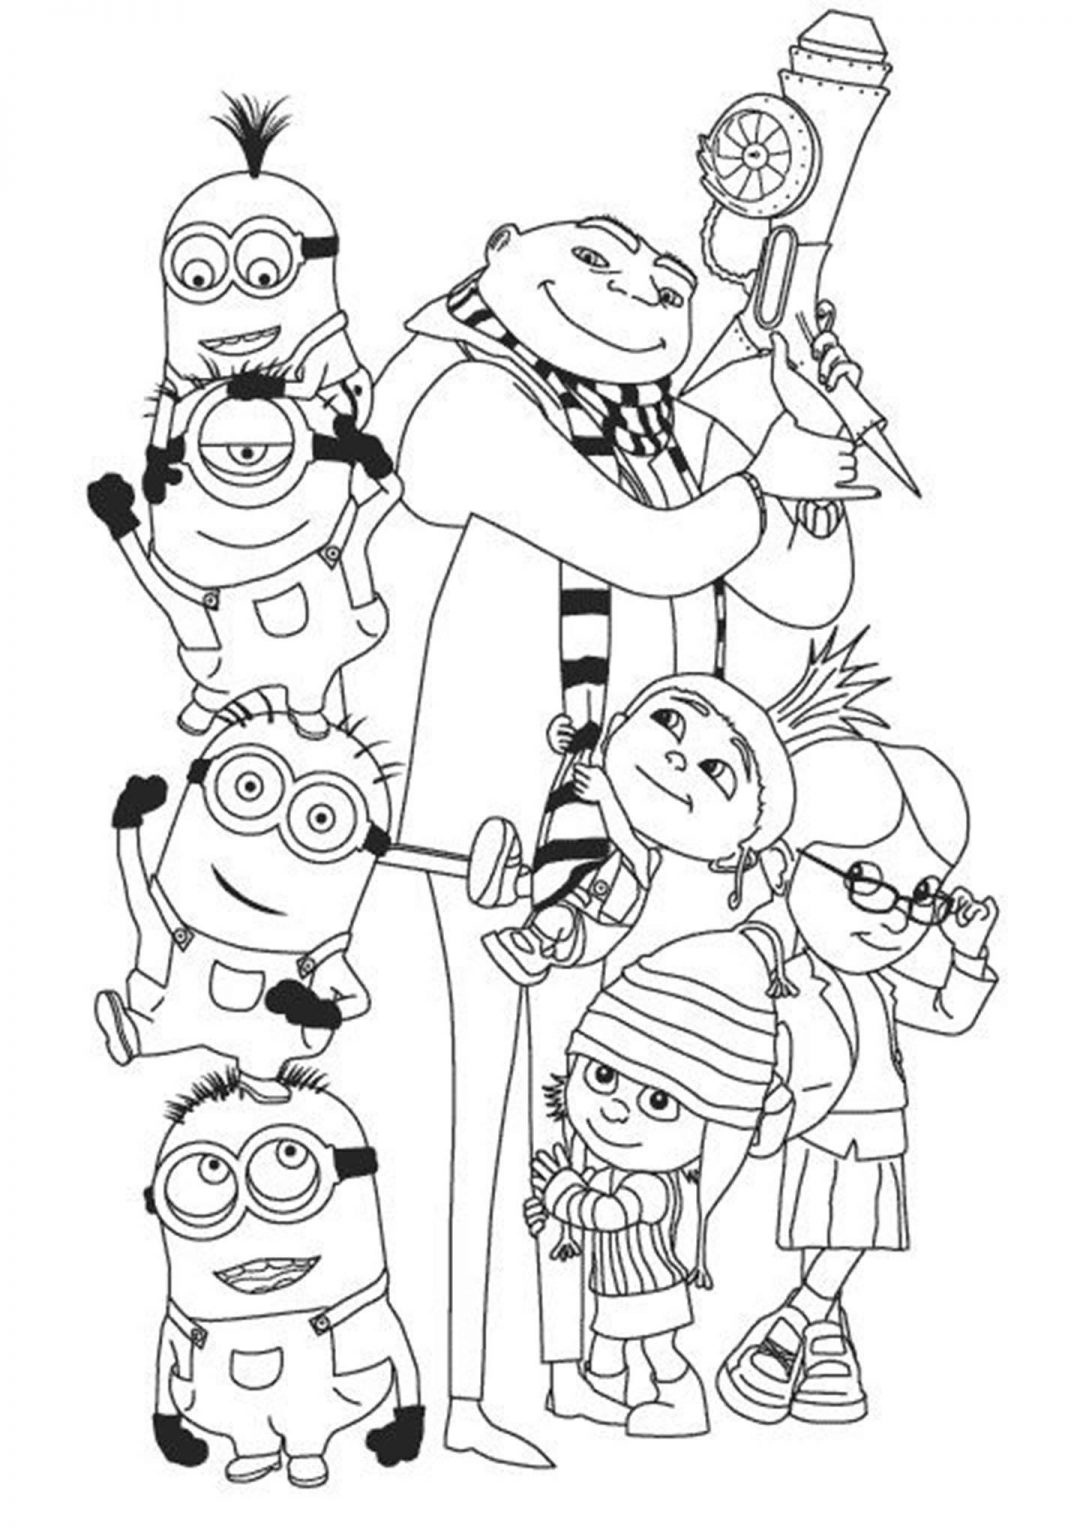 Free & Easy To Print Minions Coloring Pages - Tulamama